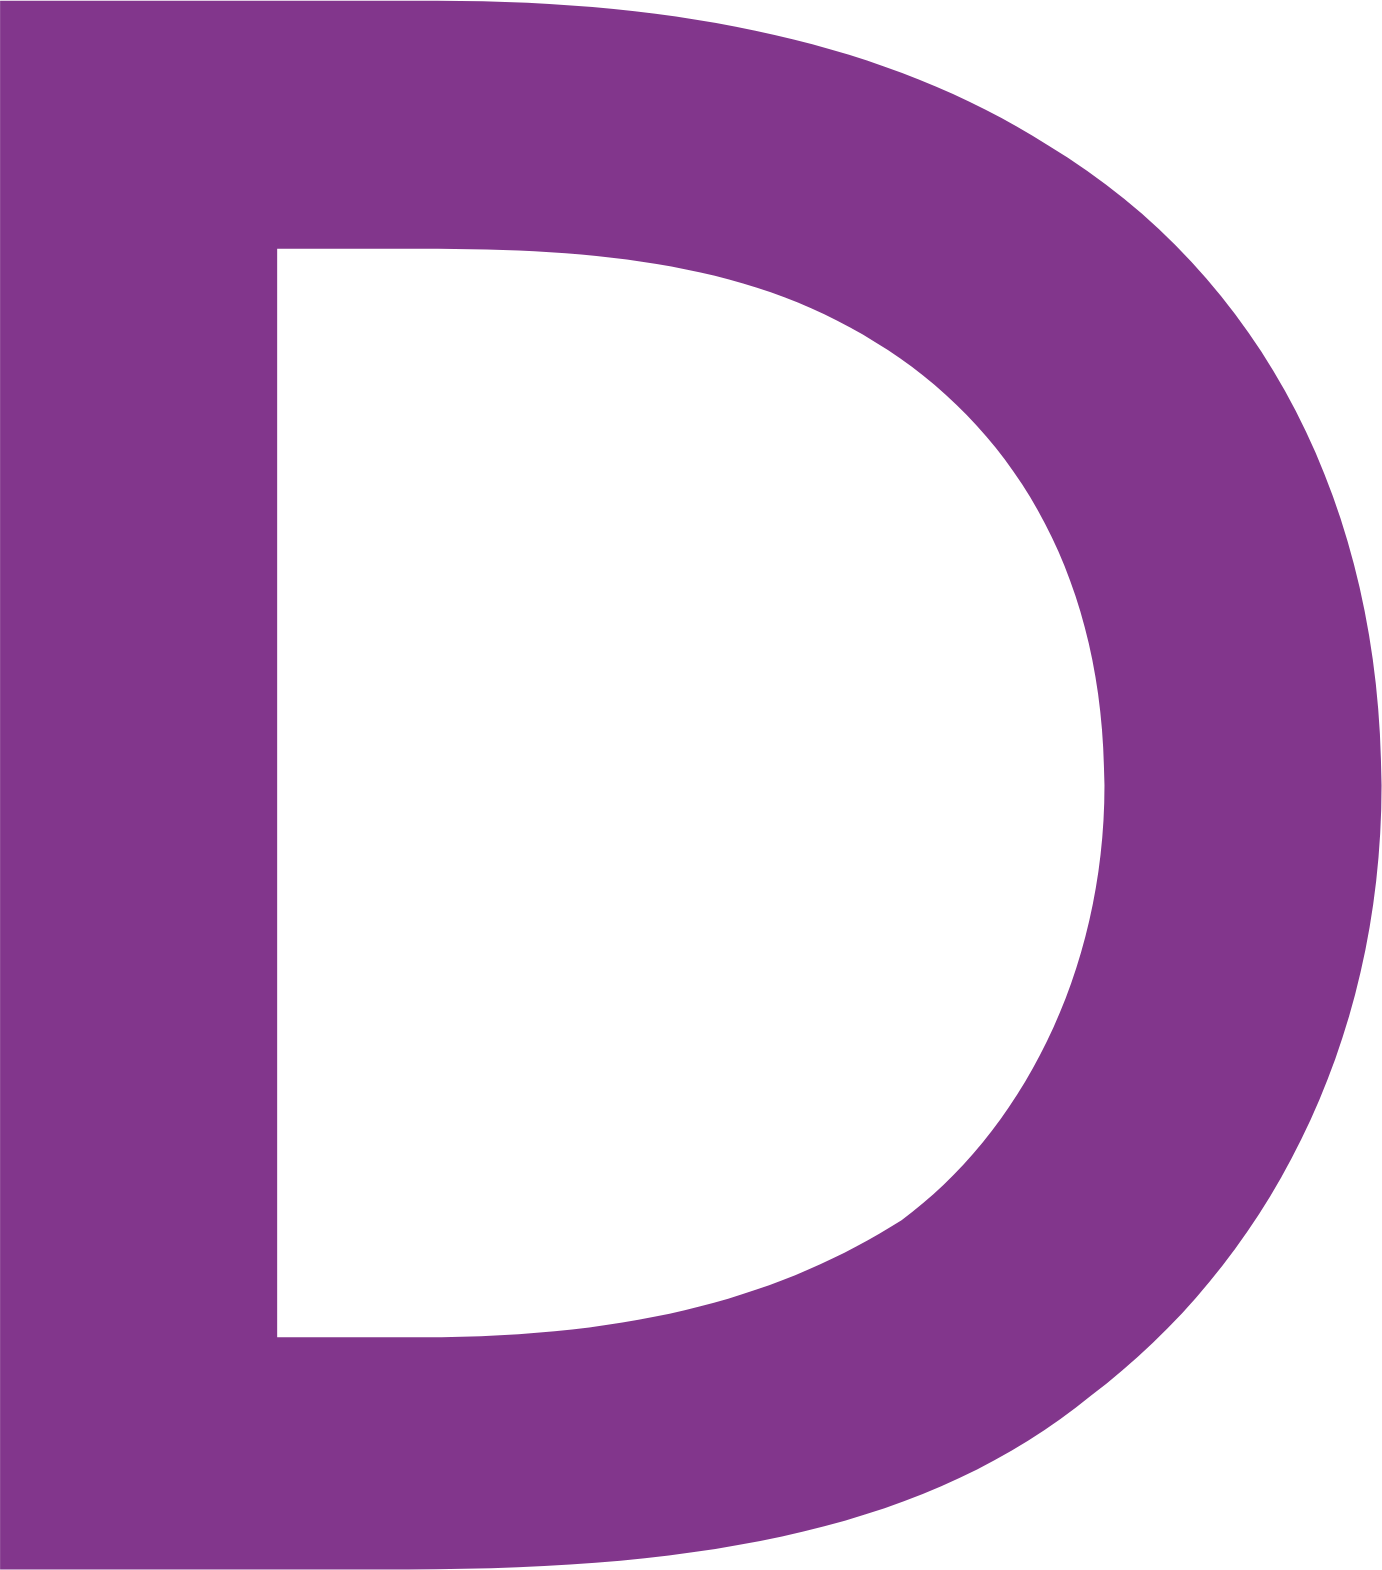 Diploma plc logo in transparent PNG and vectorized SVG formats